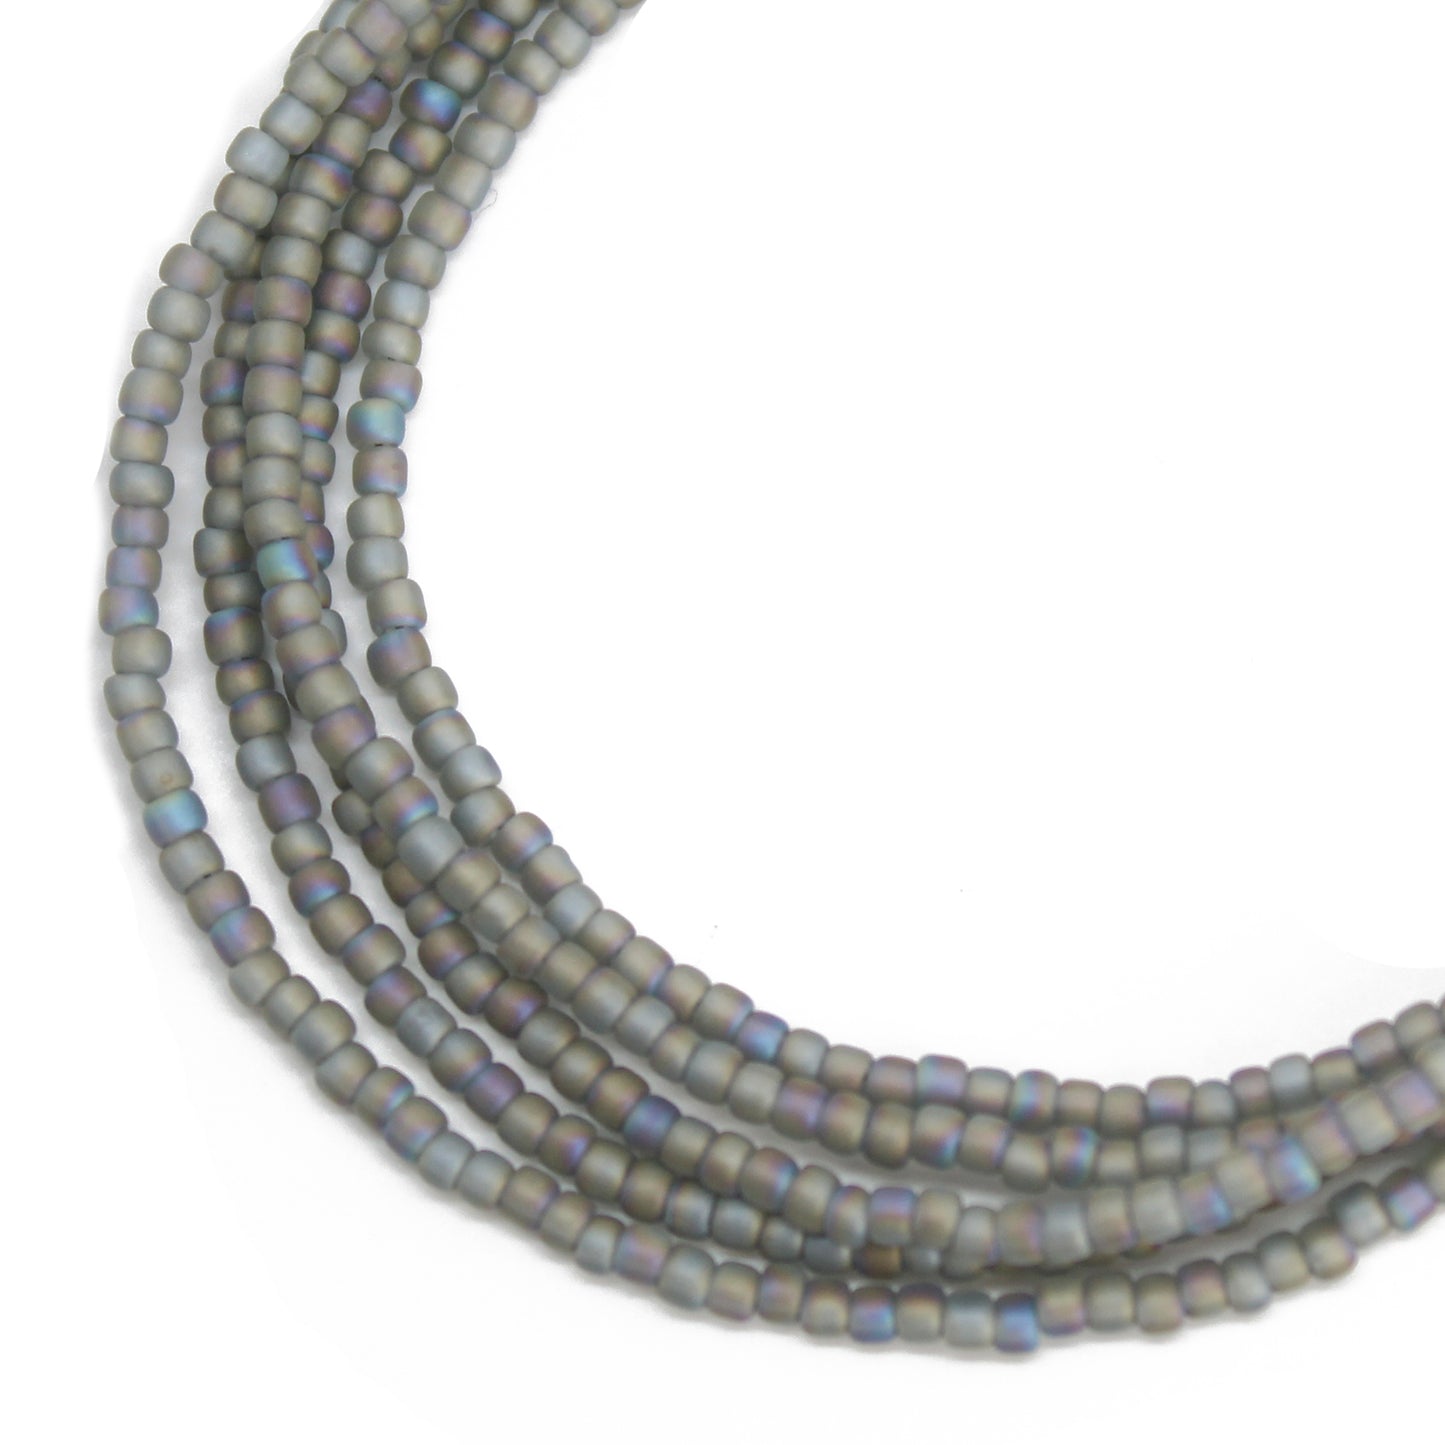 Transparent Rainbow Frosted Grey Seed Bead Necklace, Thin 1.5mm Single Strand